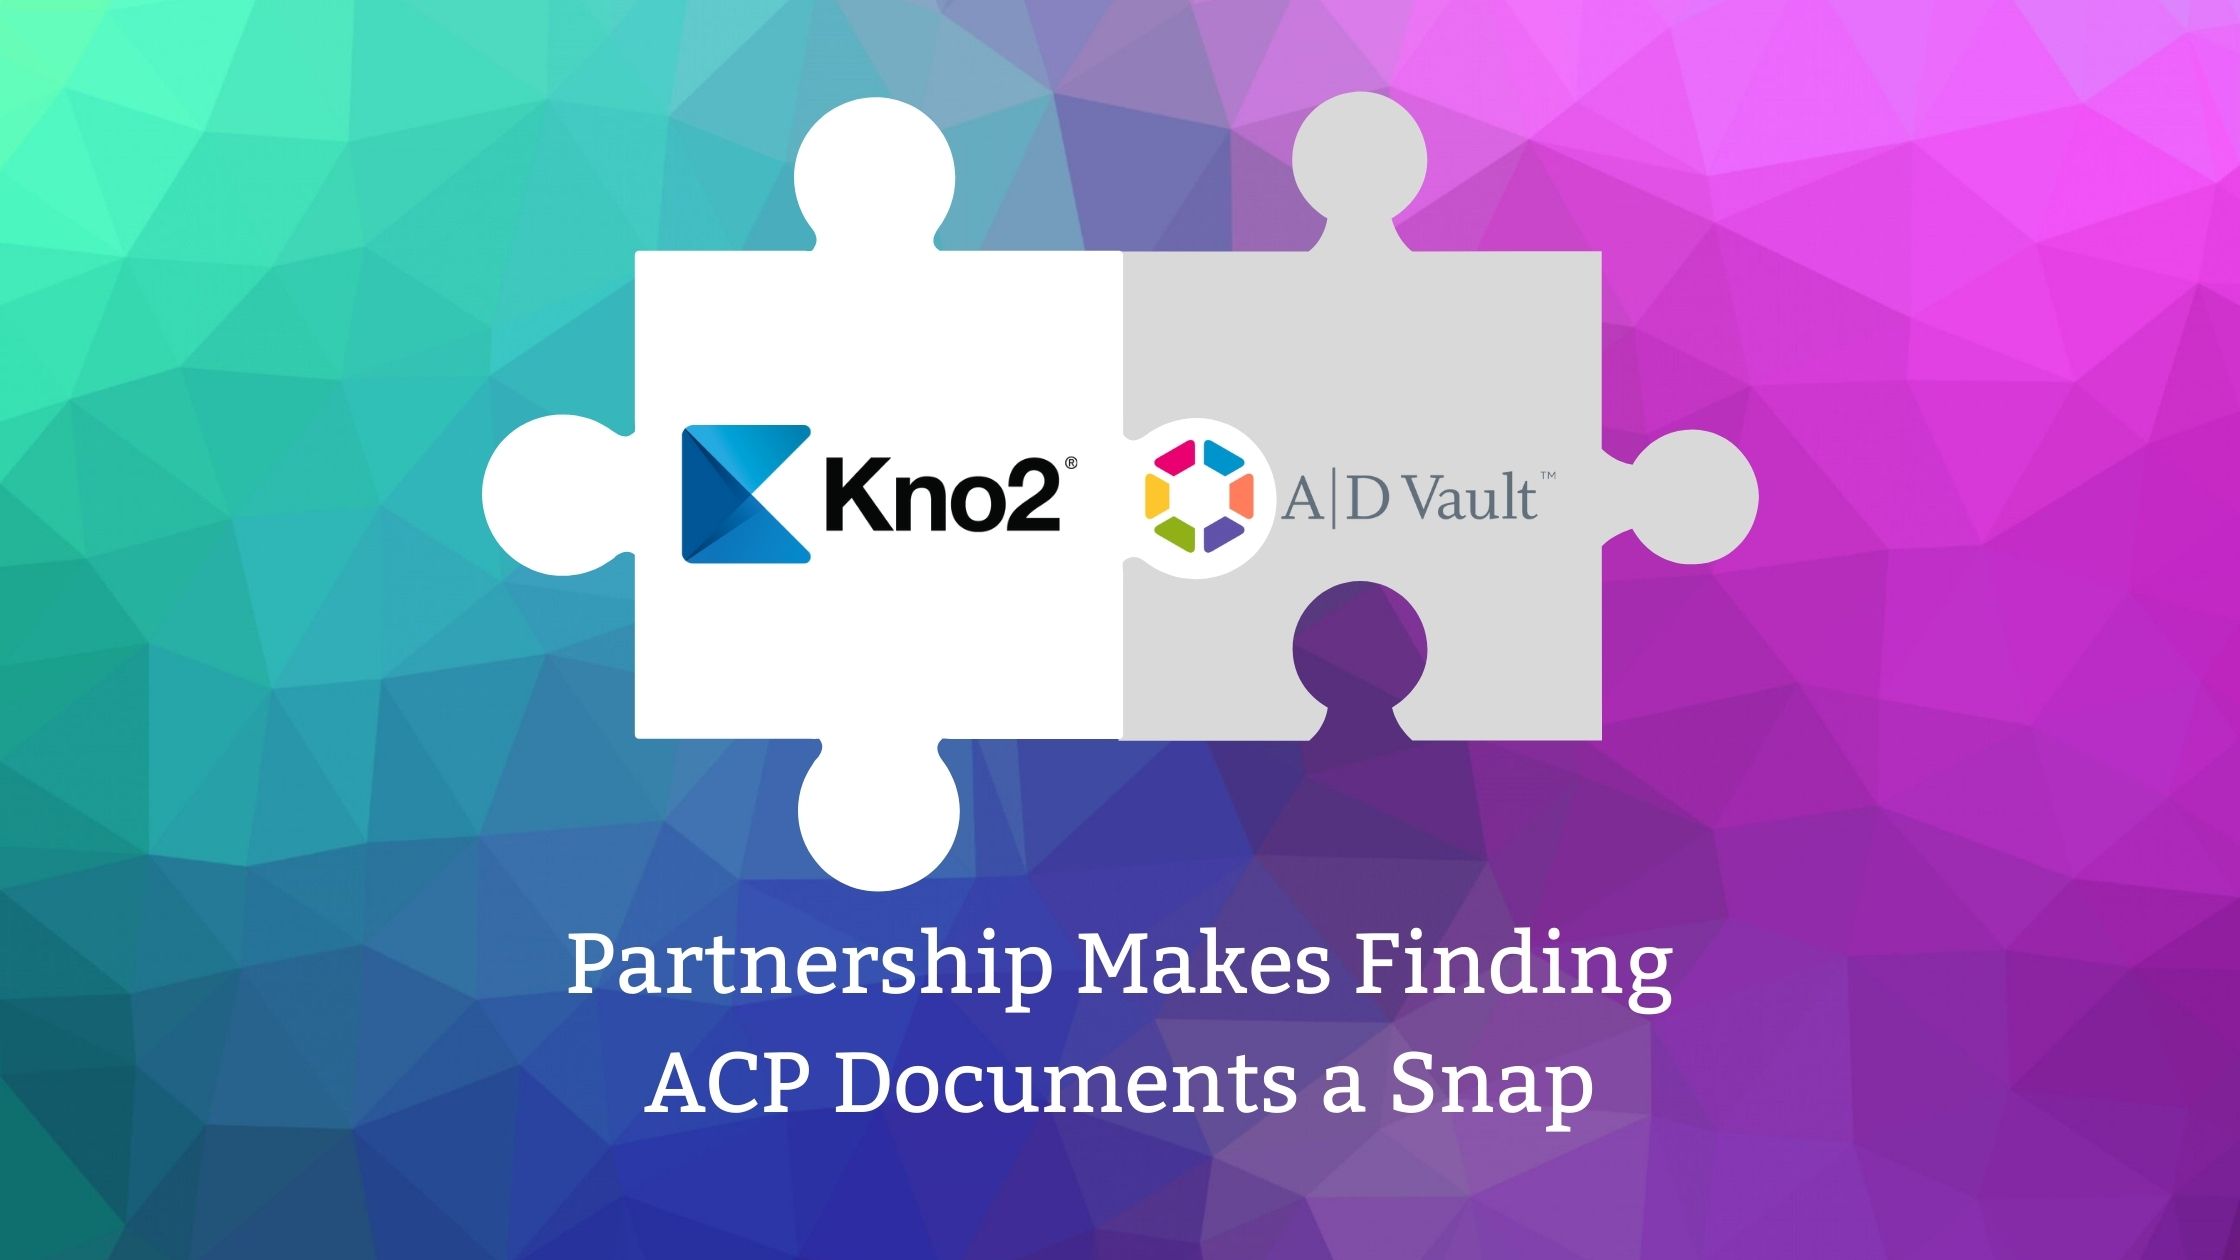 ADVault and Kno2 Partnership Makes Finding ACP Documents a Snap